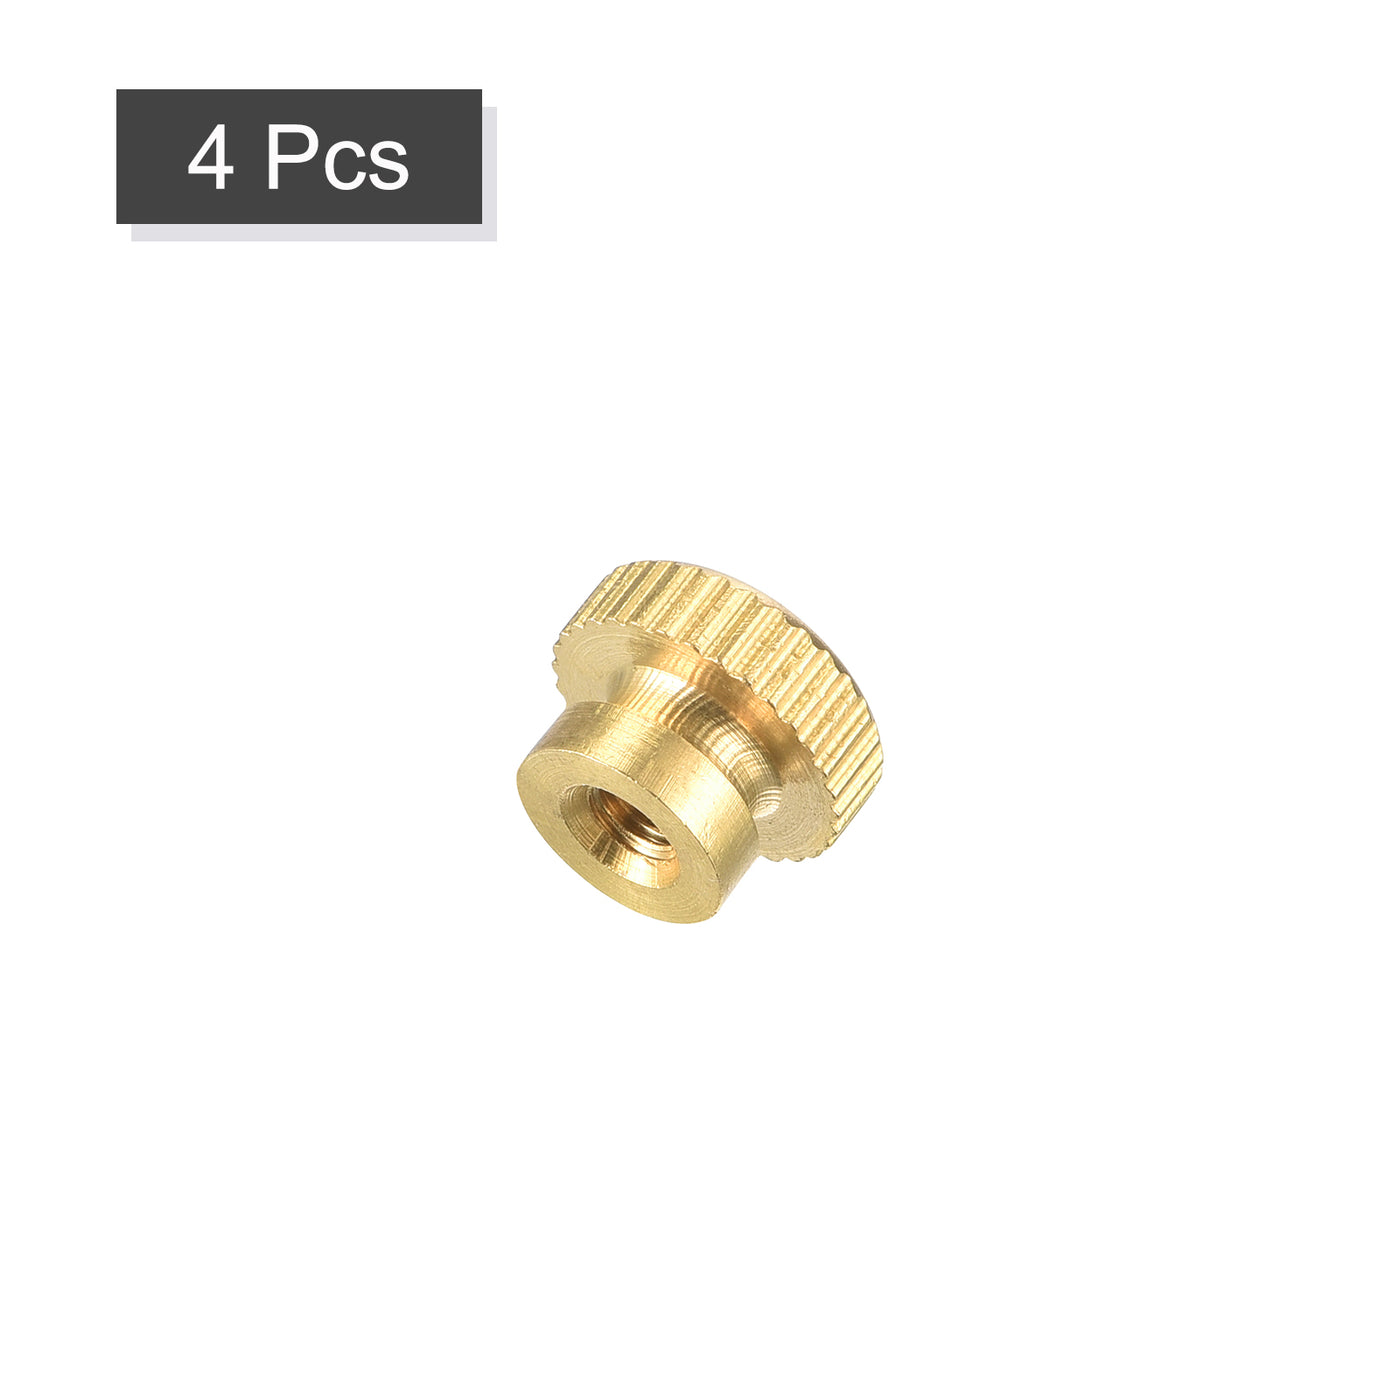 uxcell Uxcell Brass Knurled Thumb Nuts, M3x0.5mm Round Stepped Knobs Fasteners for 3D Printer, Electronic Equipment 4Pcs